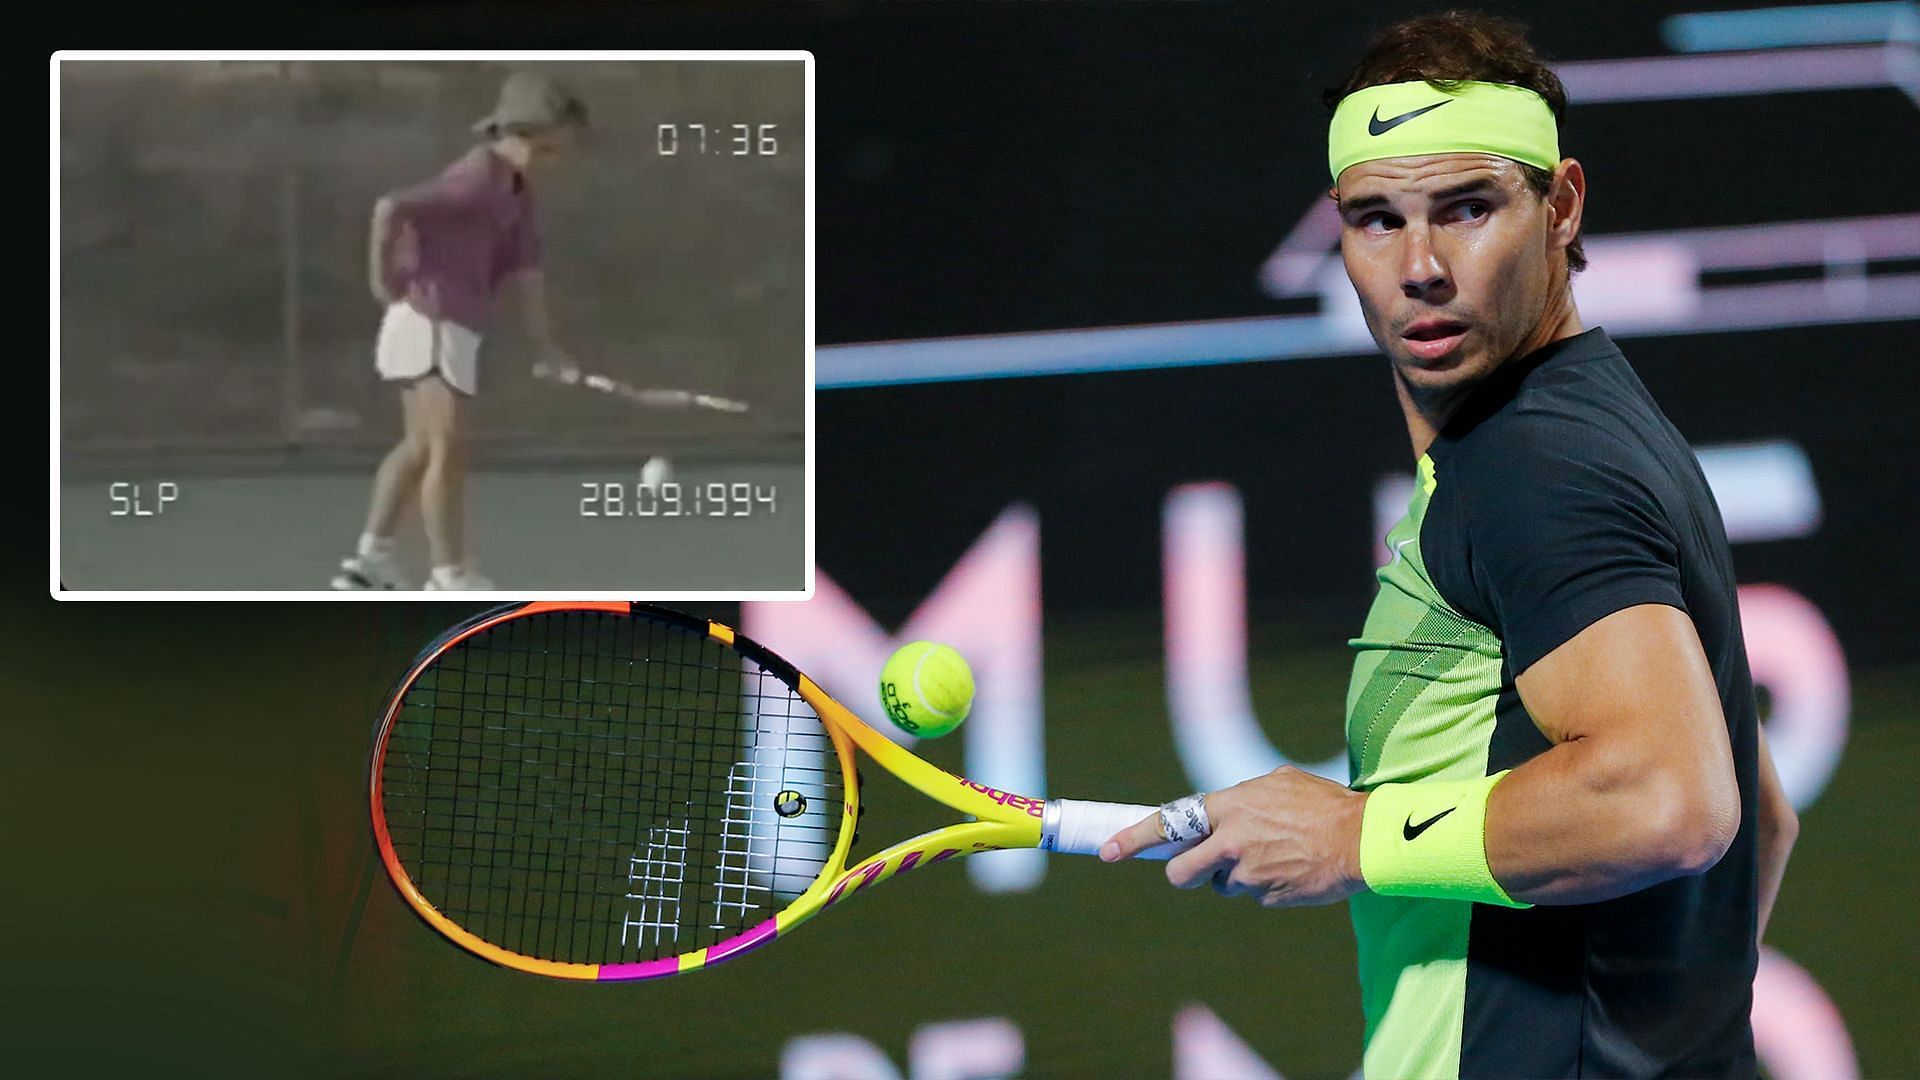 Rafael Nadal has been on tour for more than two decades.